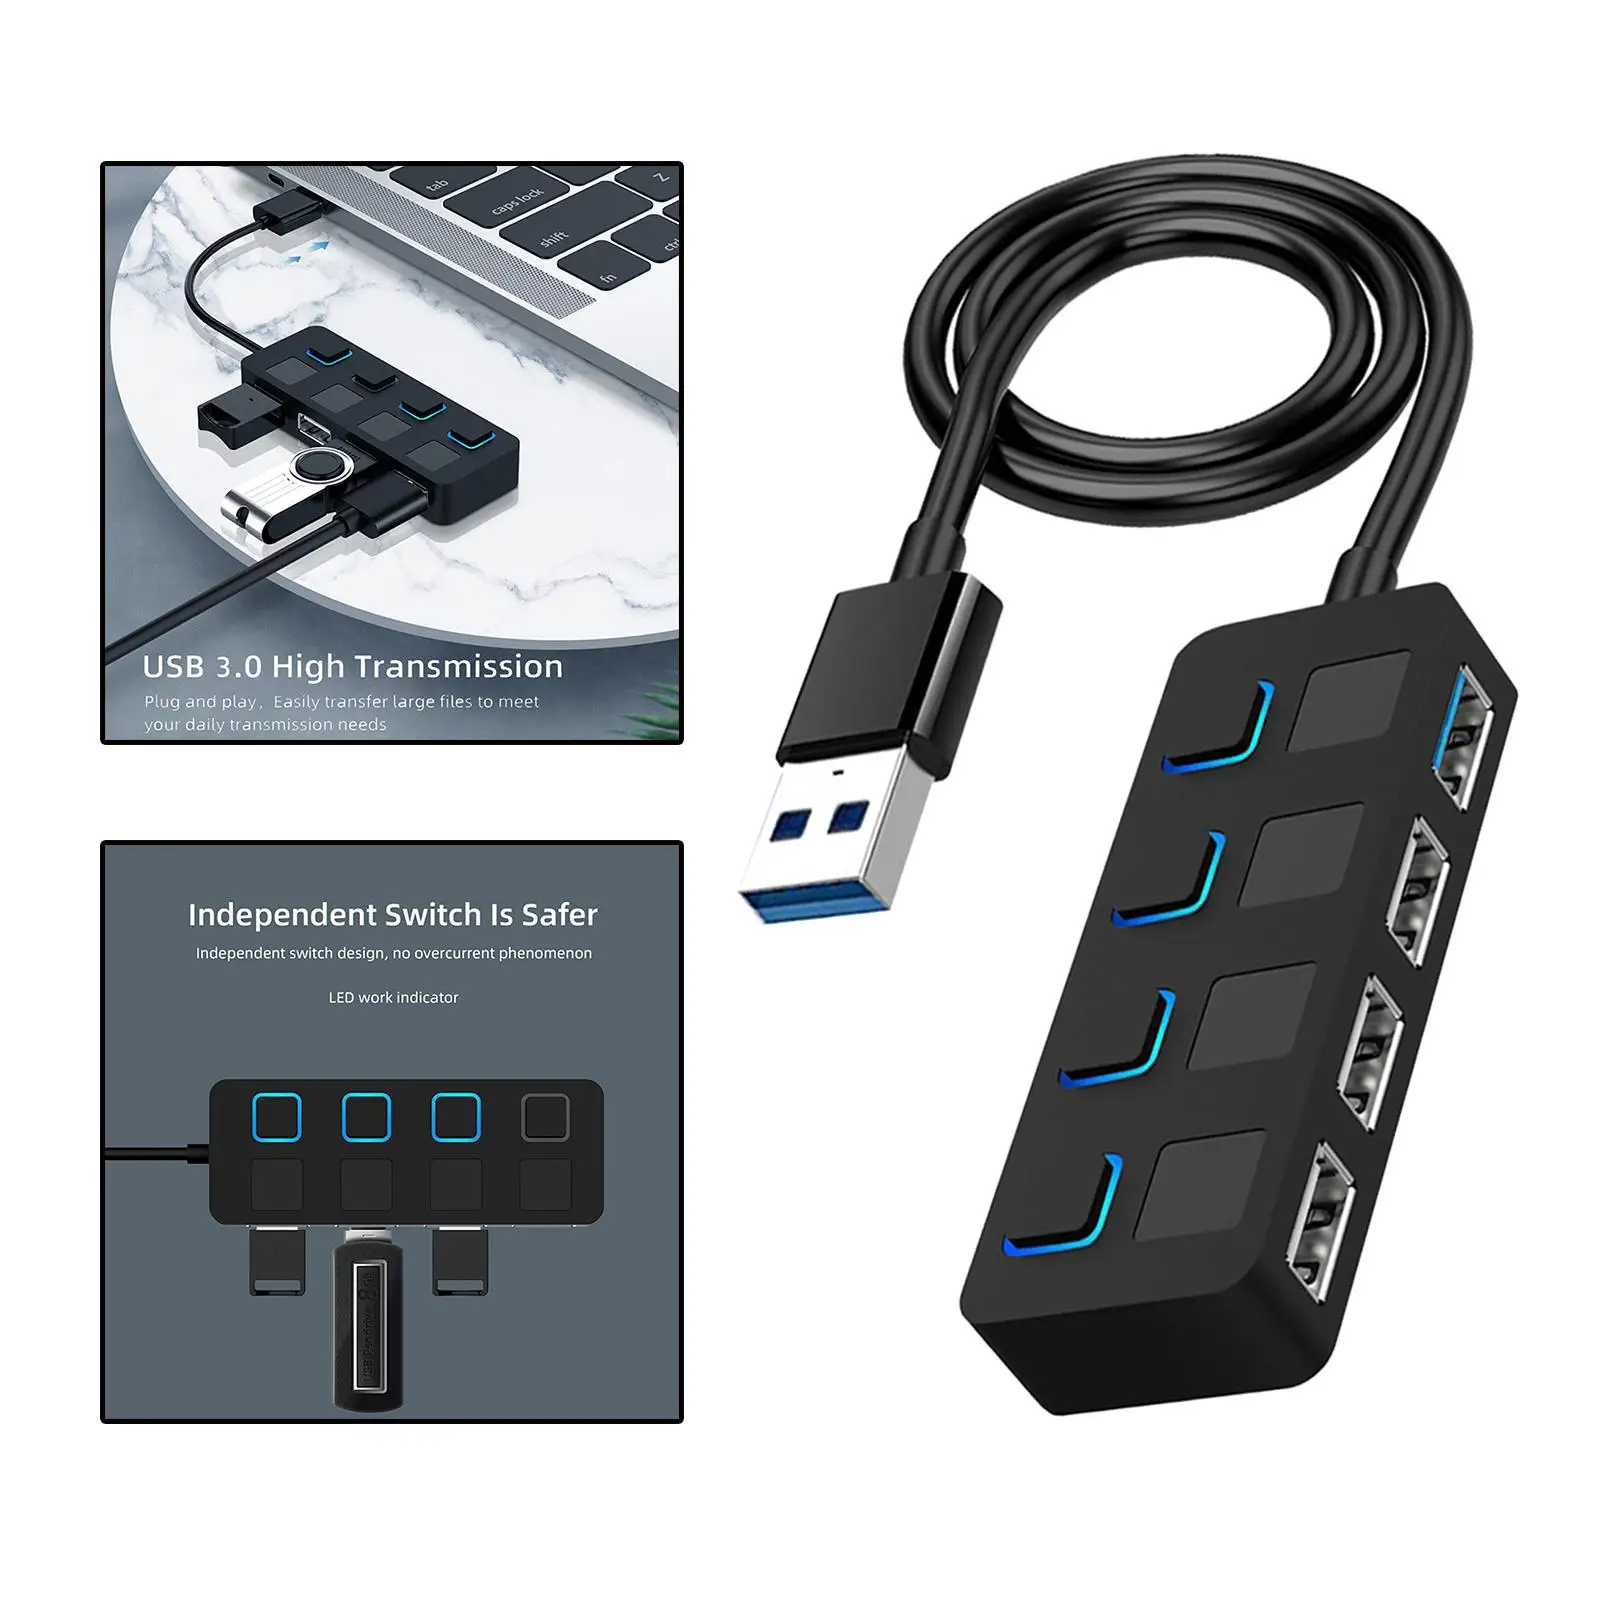 4 Port USB 3.0 Hub, with Extended Cable Compact Data USB Hub for Mobile HDD PC for Surface Pro (Charging Not Supported)